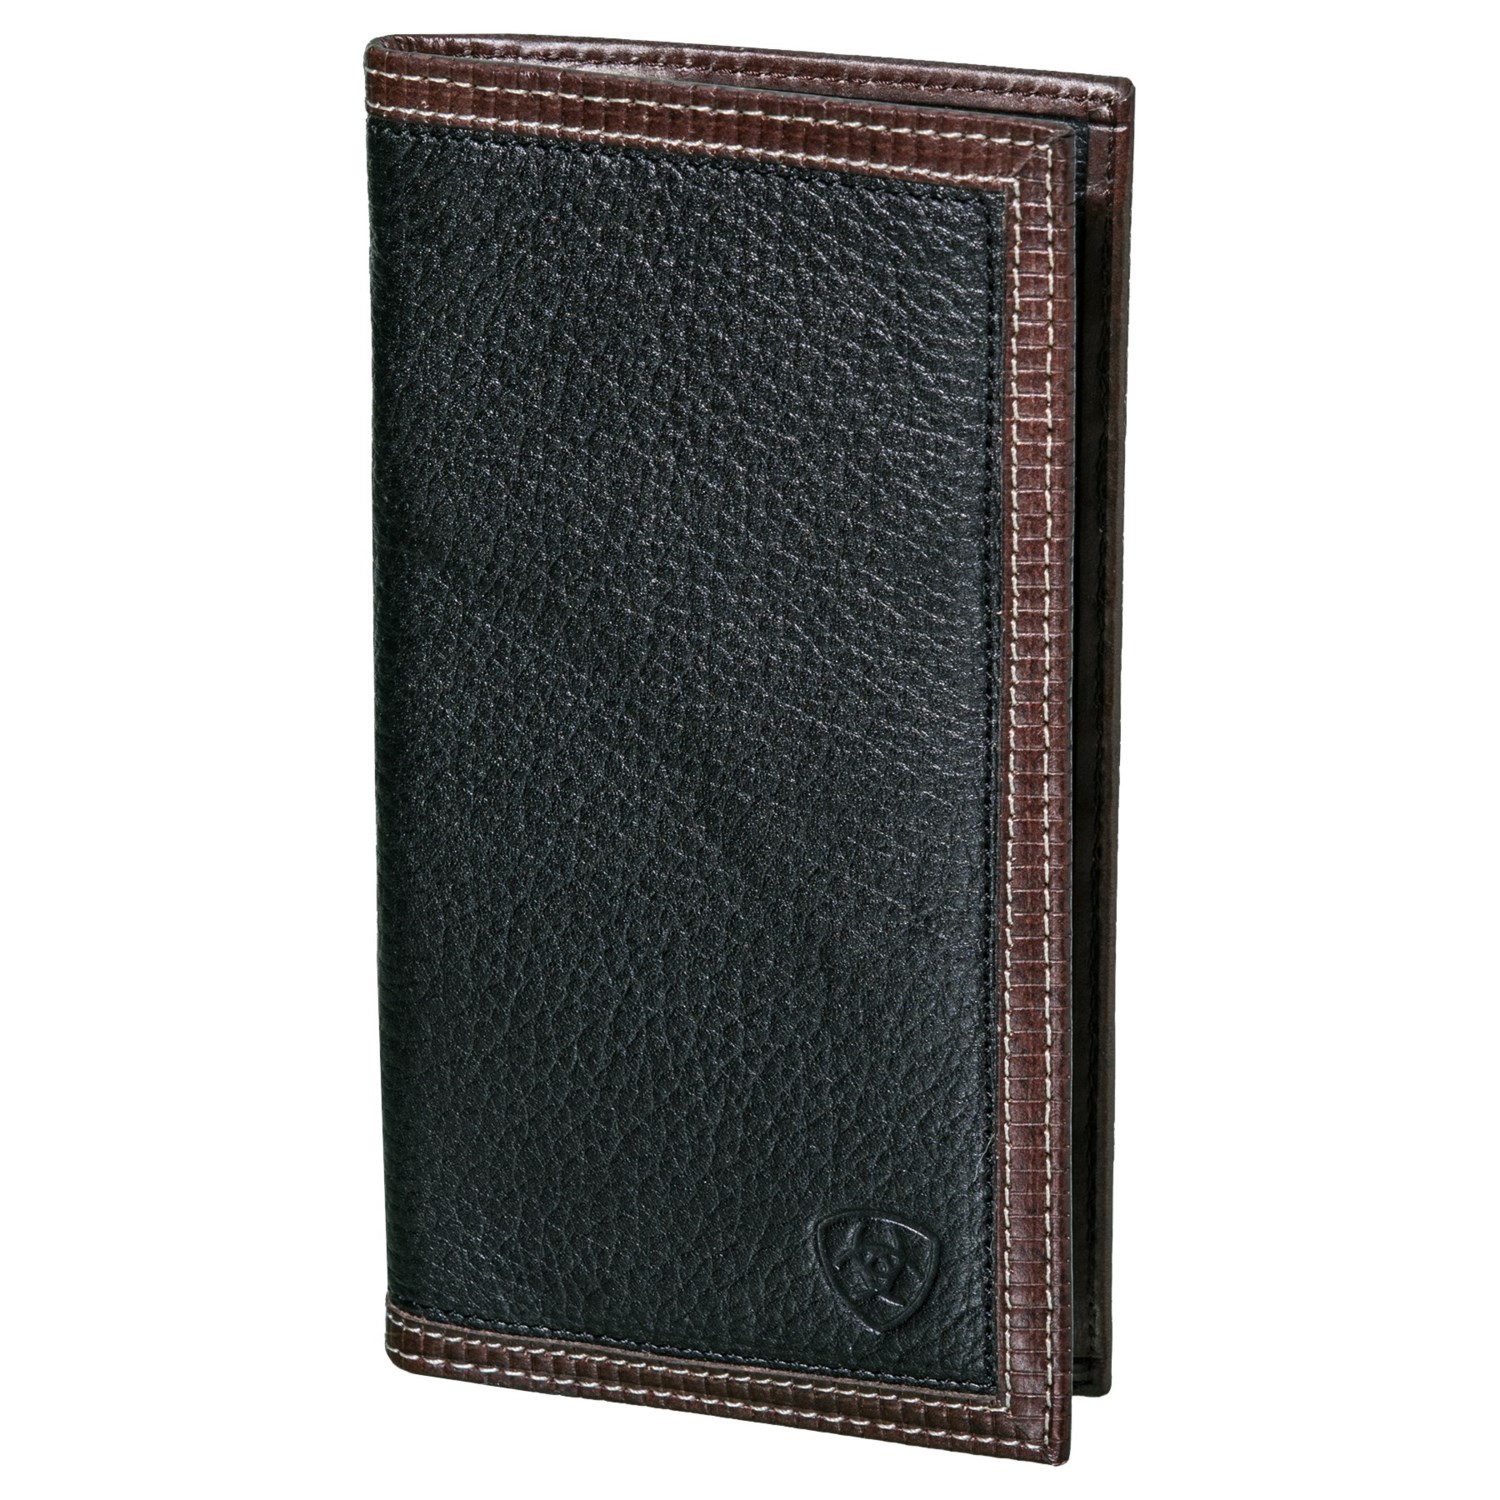 Ariat Rodeo Wallet/Checkbook Cover – Leather (For Men)